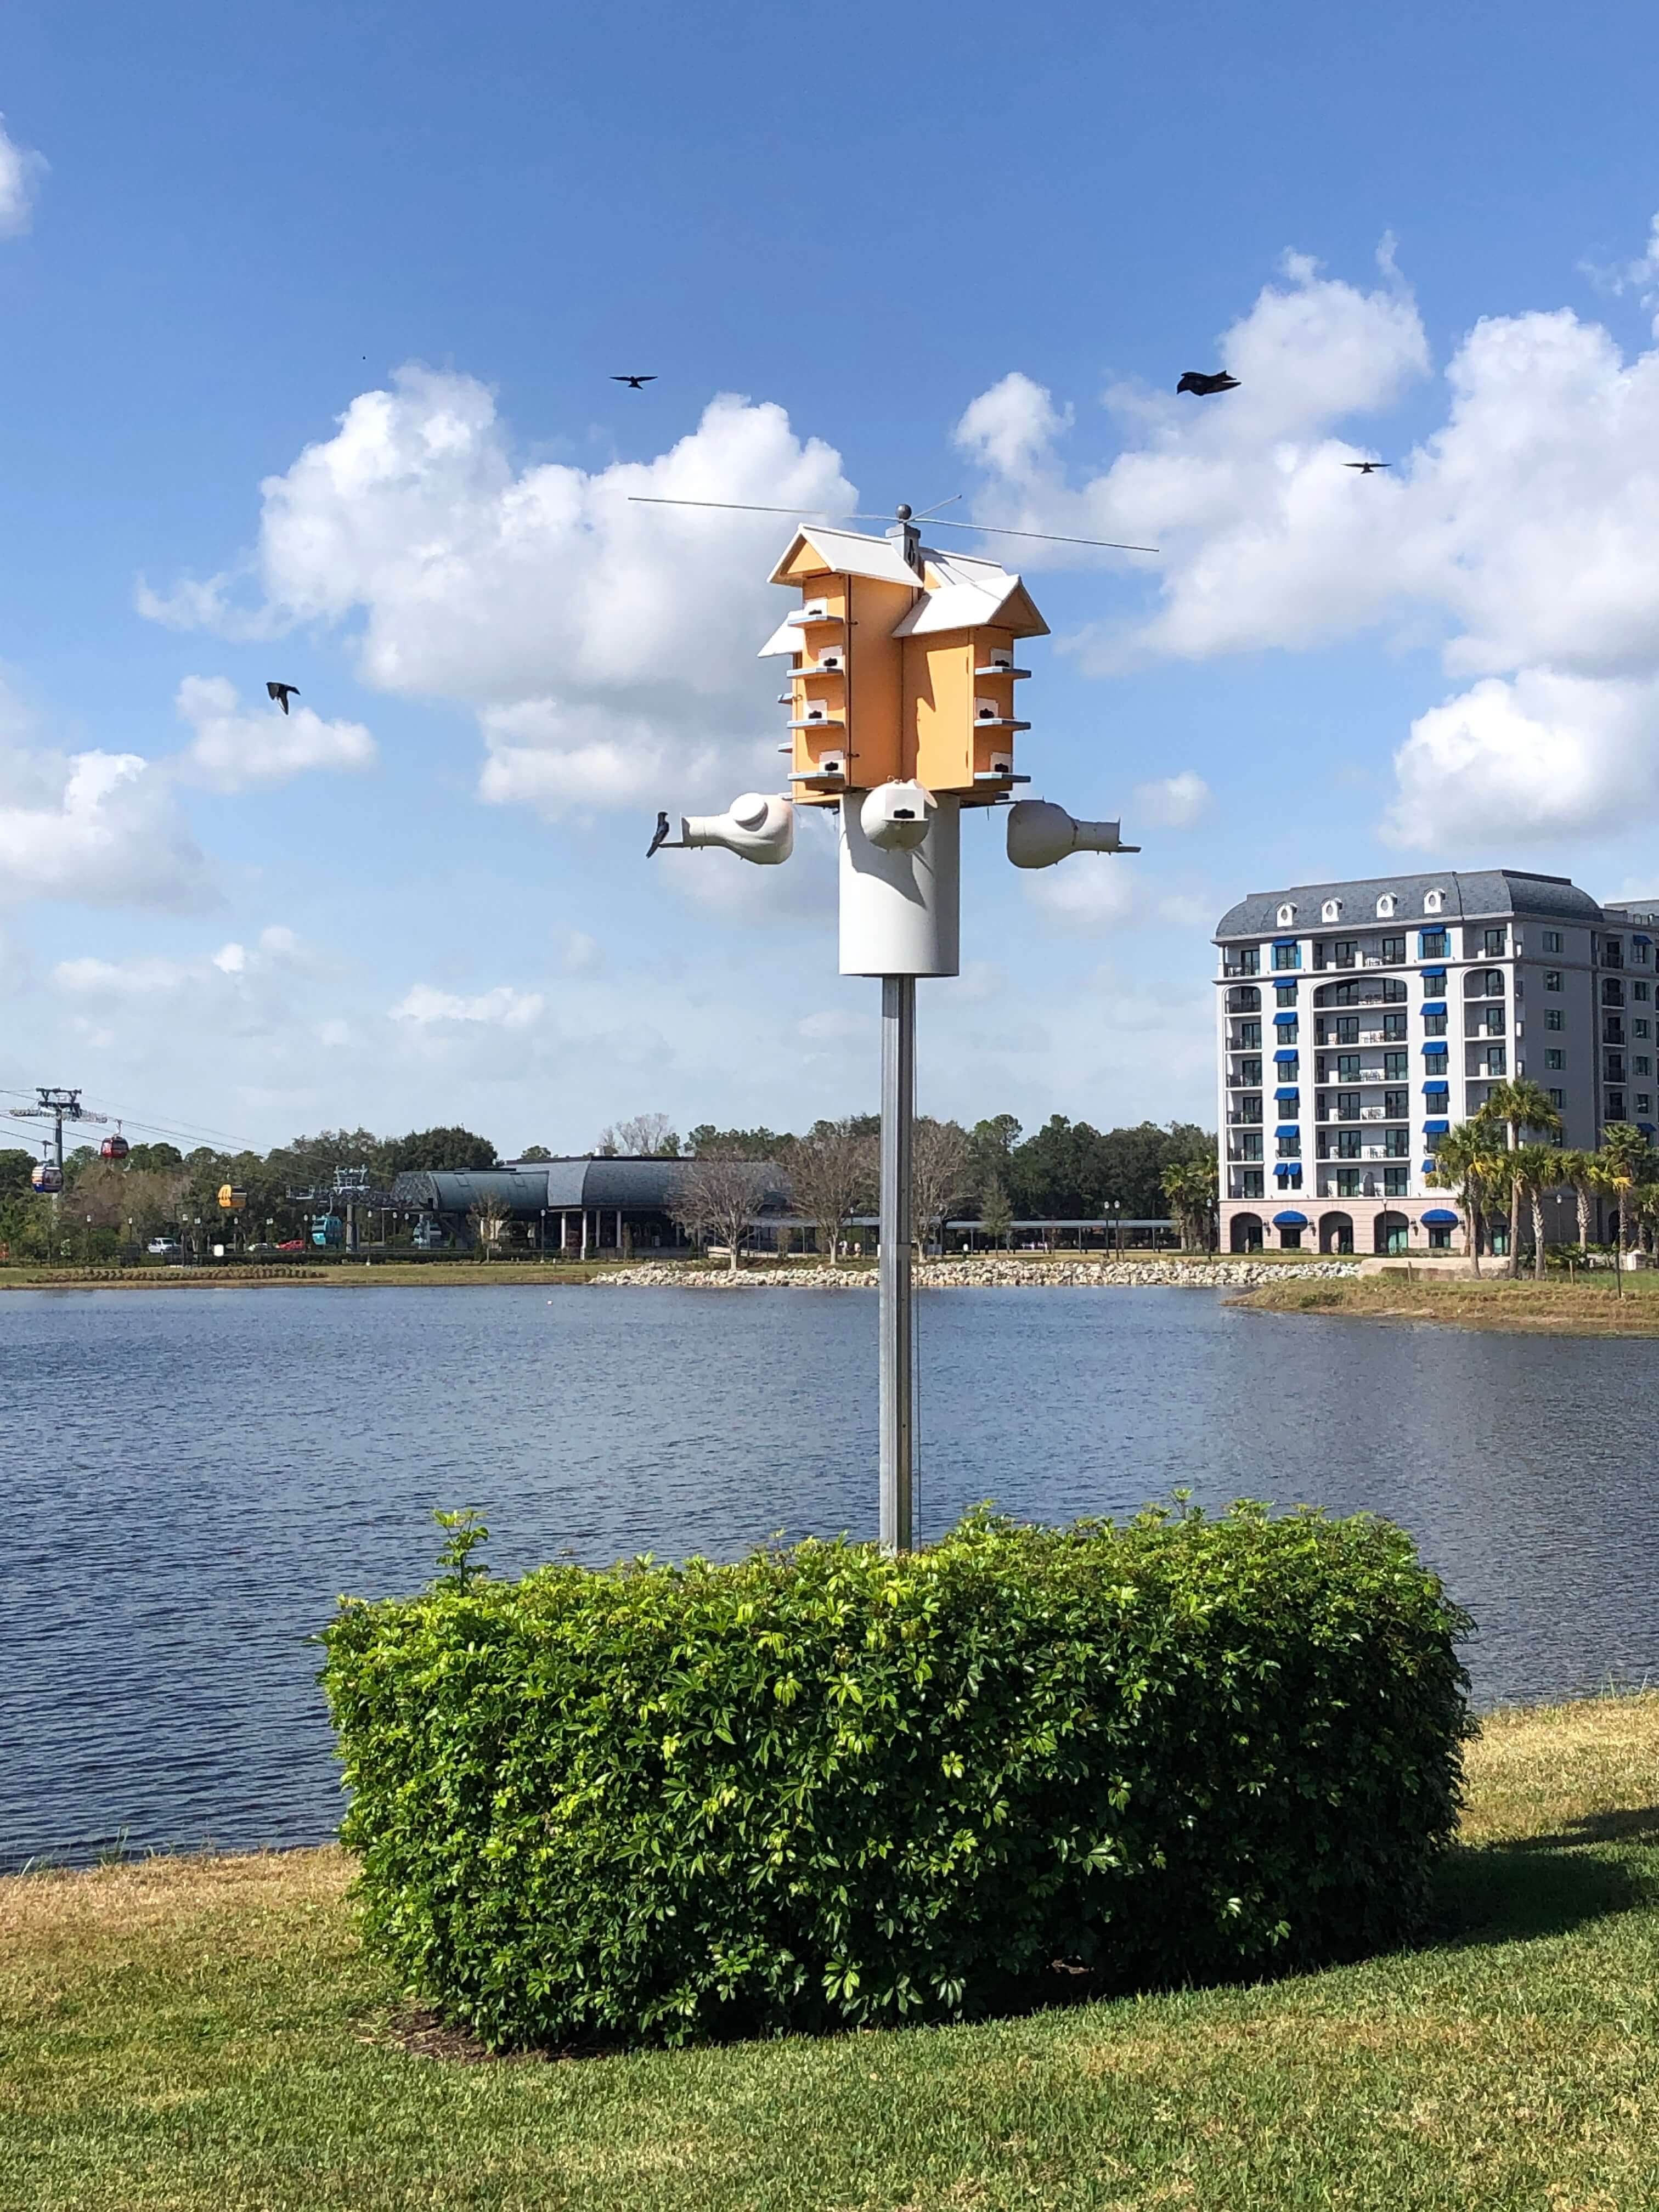 purple martins swarm a birdhouse in front of a bay